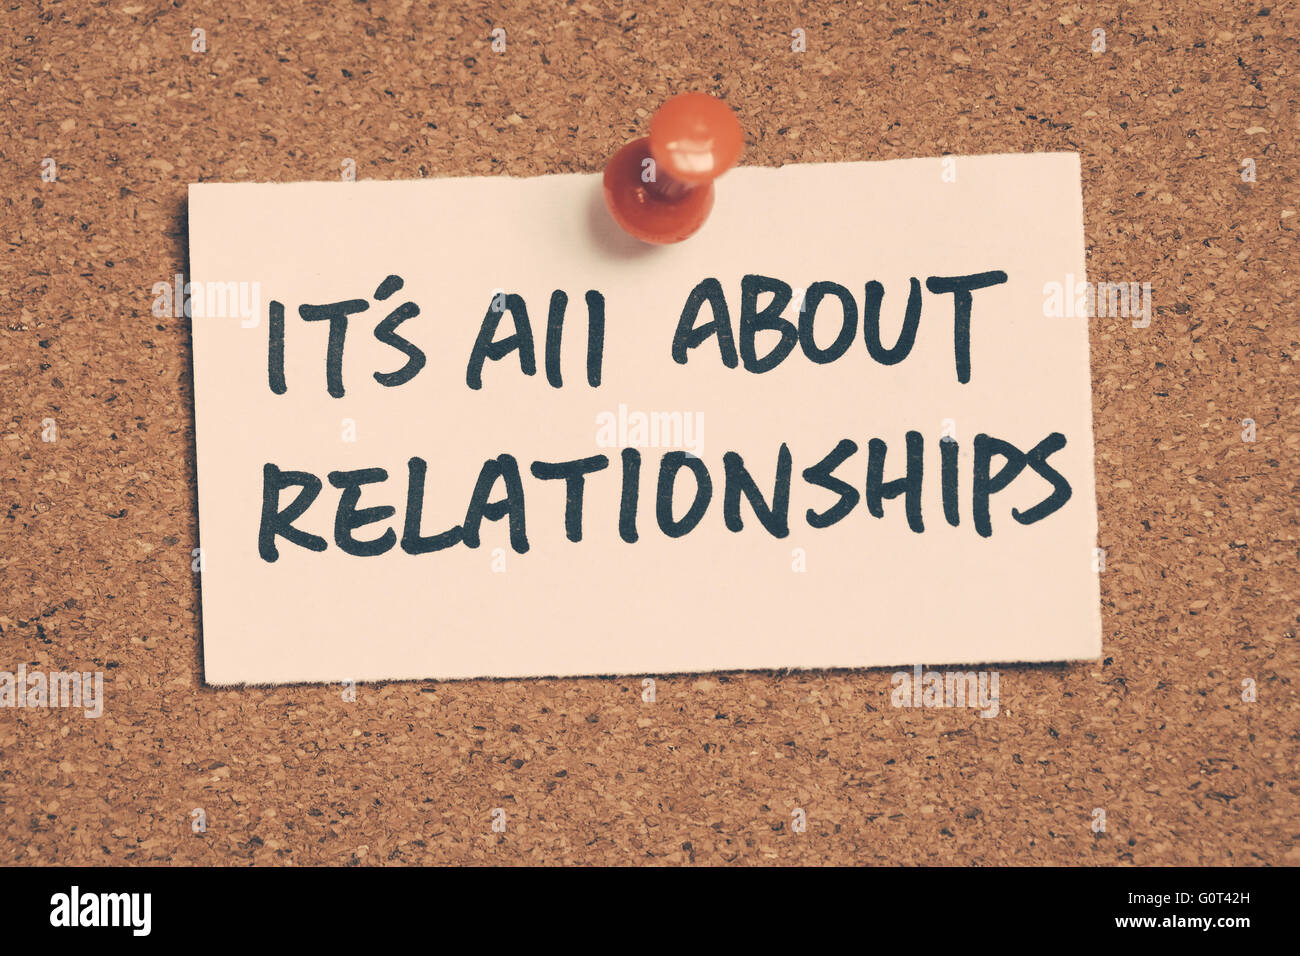 it's all about relationships Stock Photo